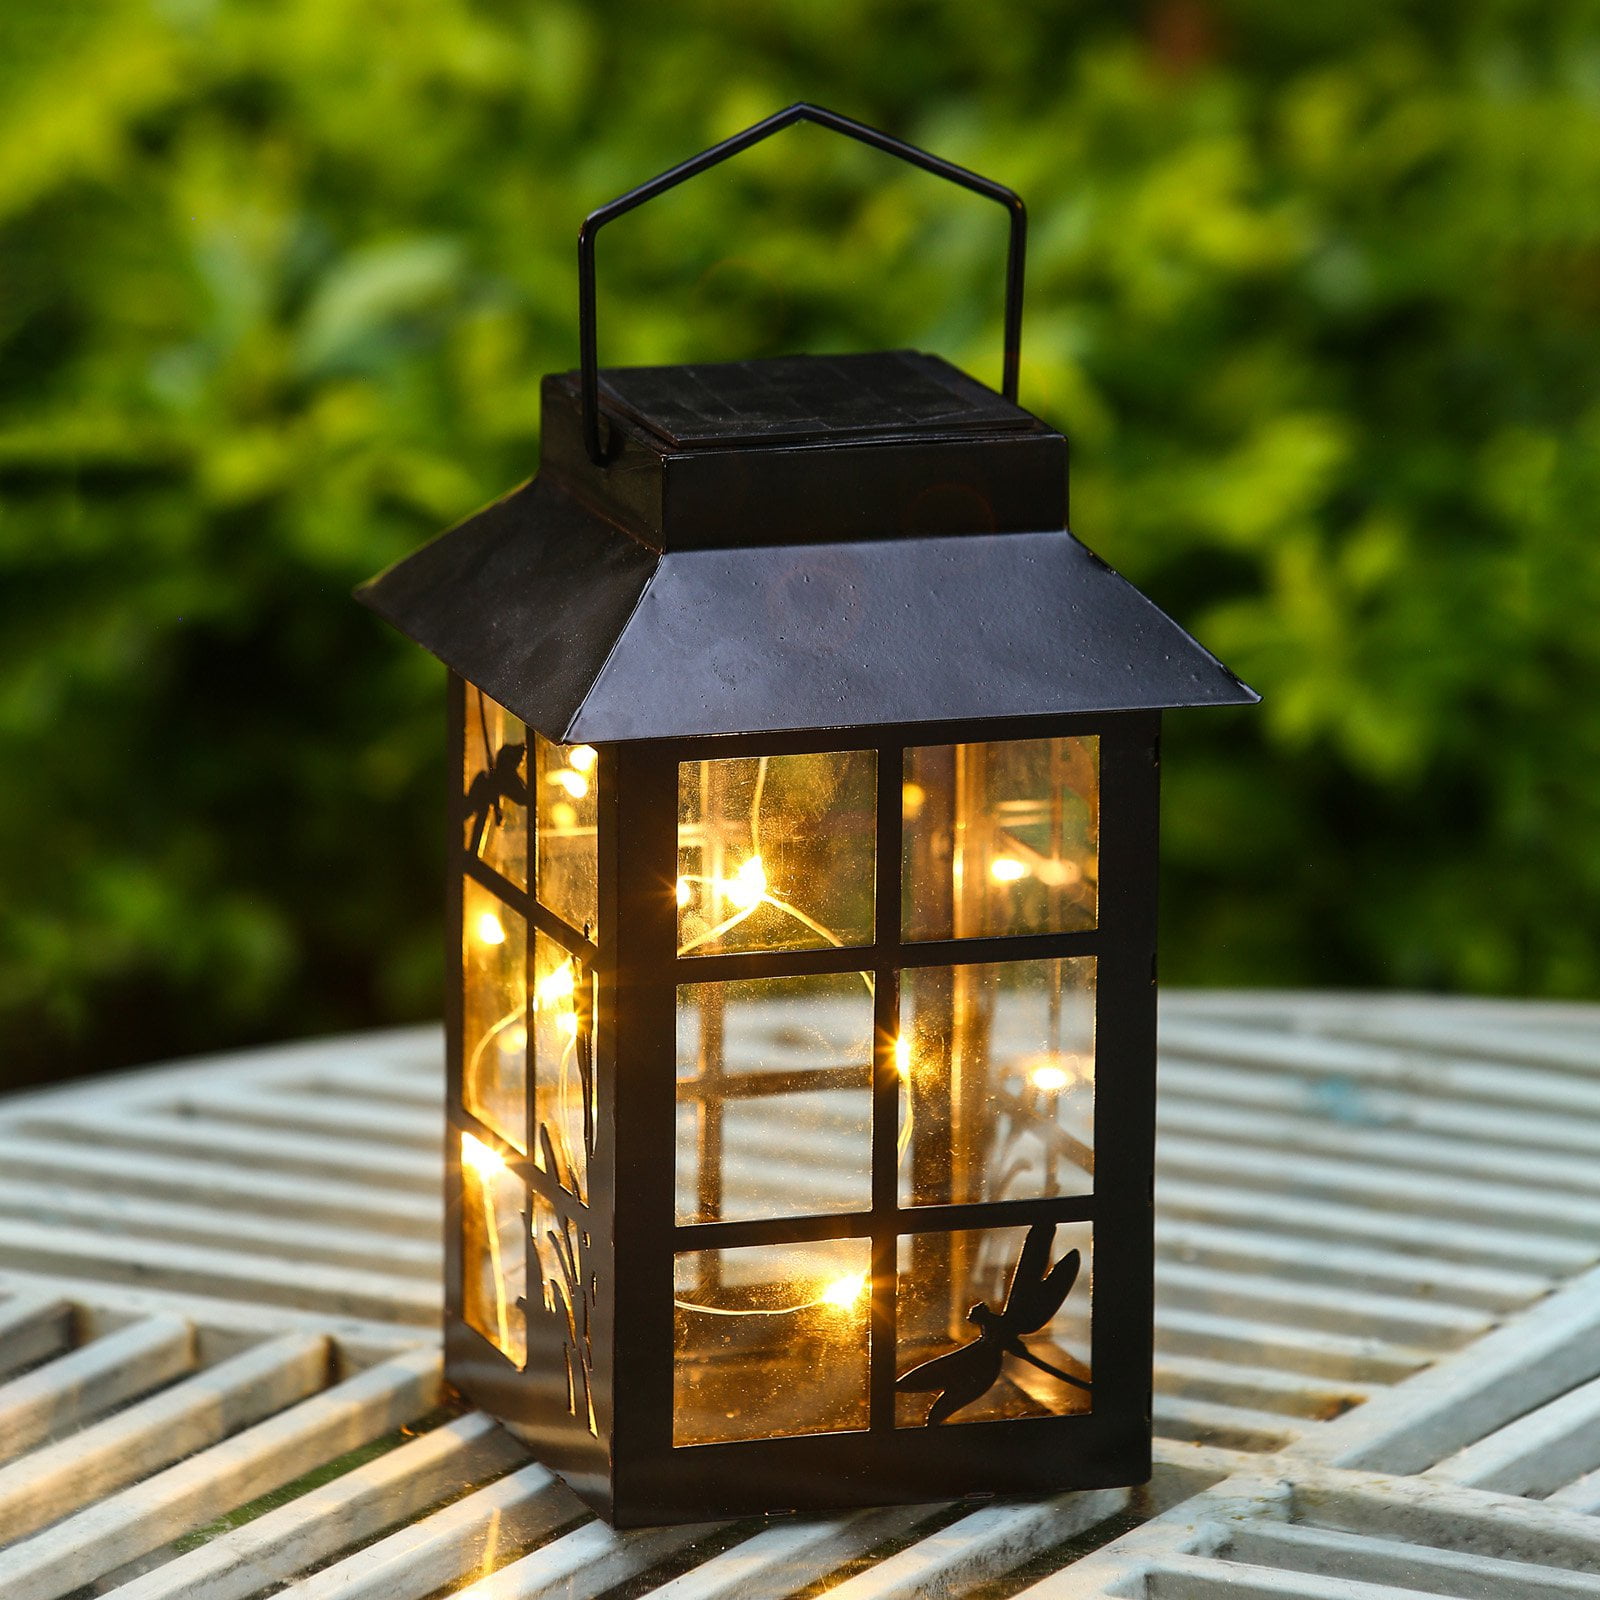 List 91+ Pictures Pictures Of Solar Lights Superb